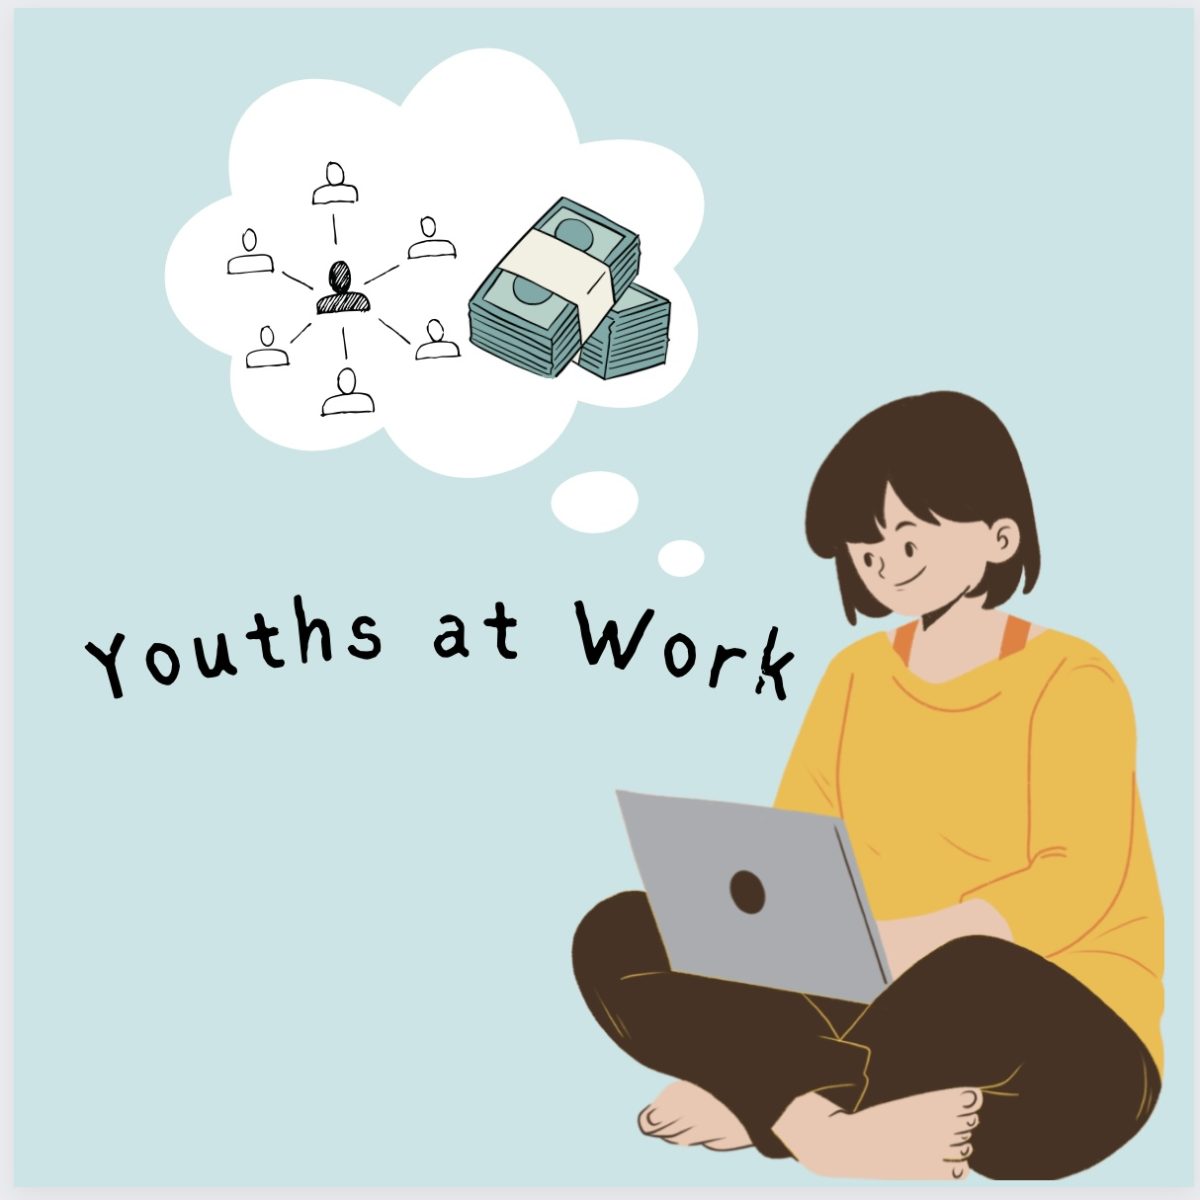 Youths at work